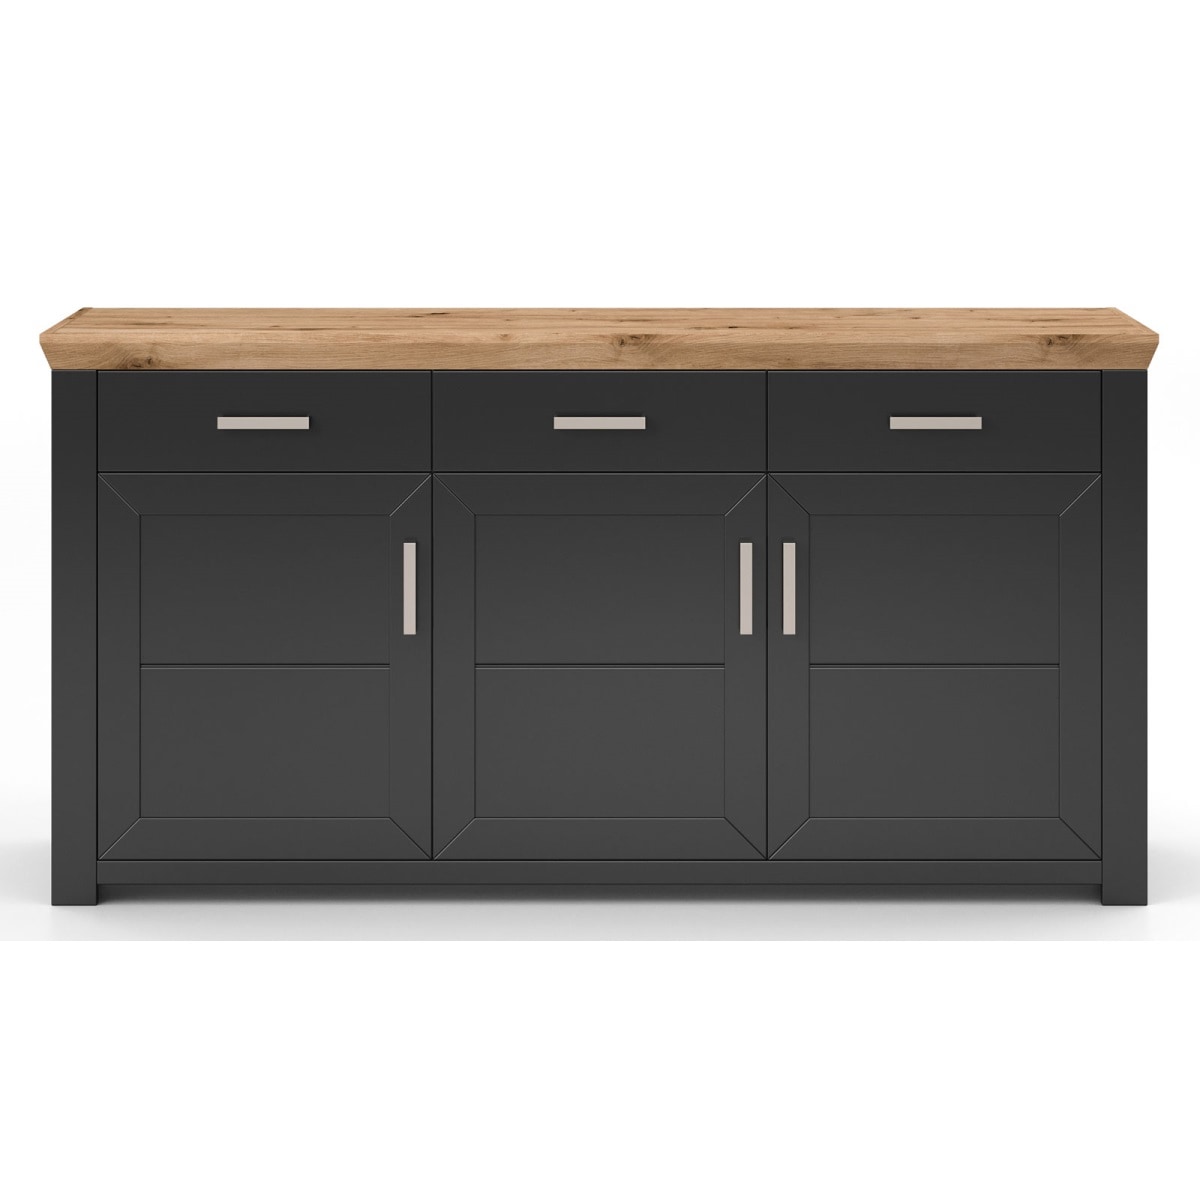 YORK one by anthrazit 52 Artisan set Musterring Sideboard /Eiche